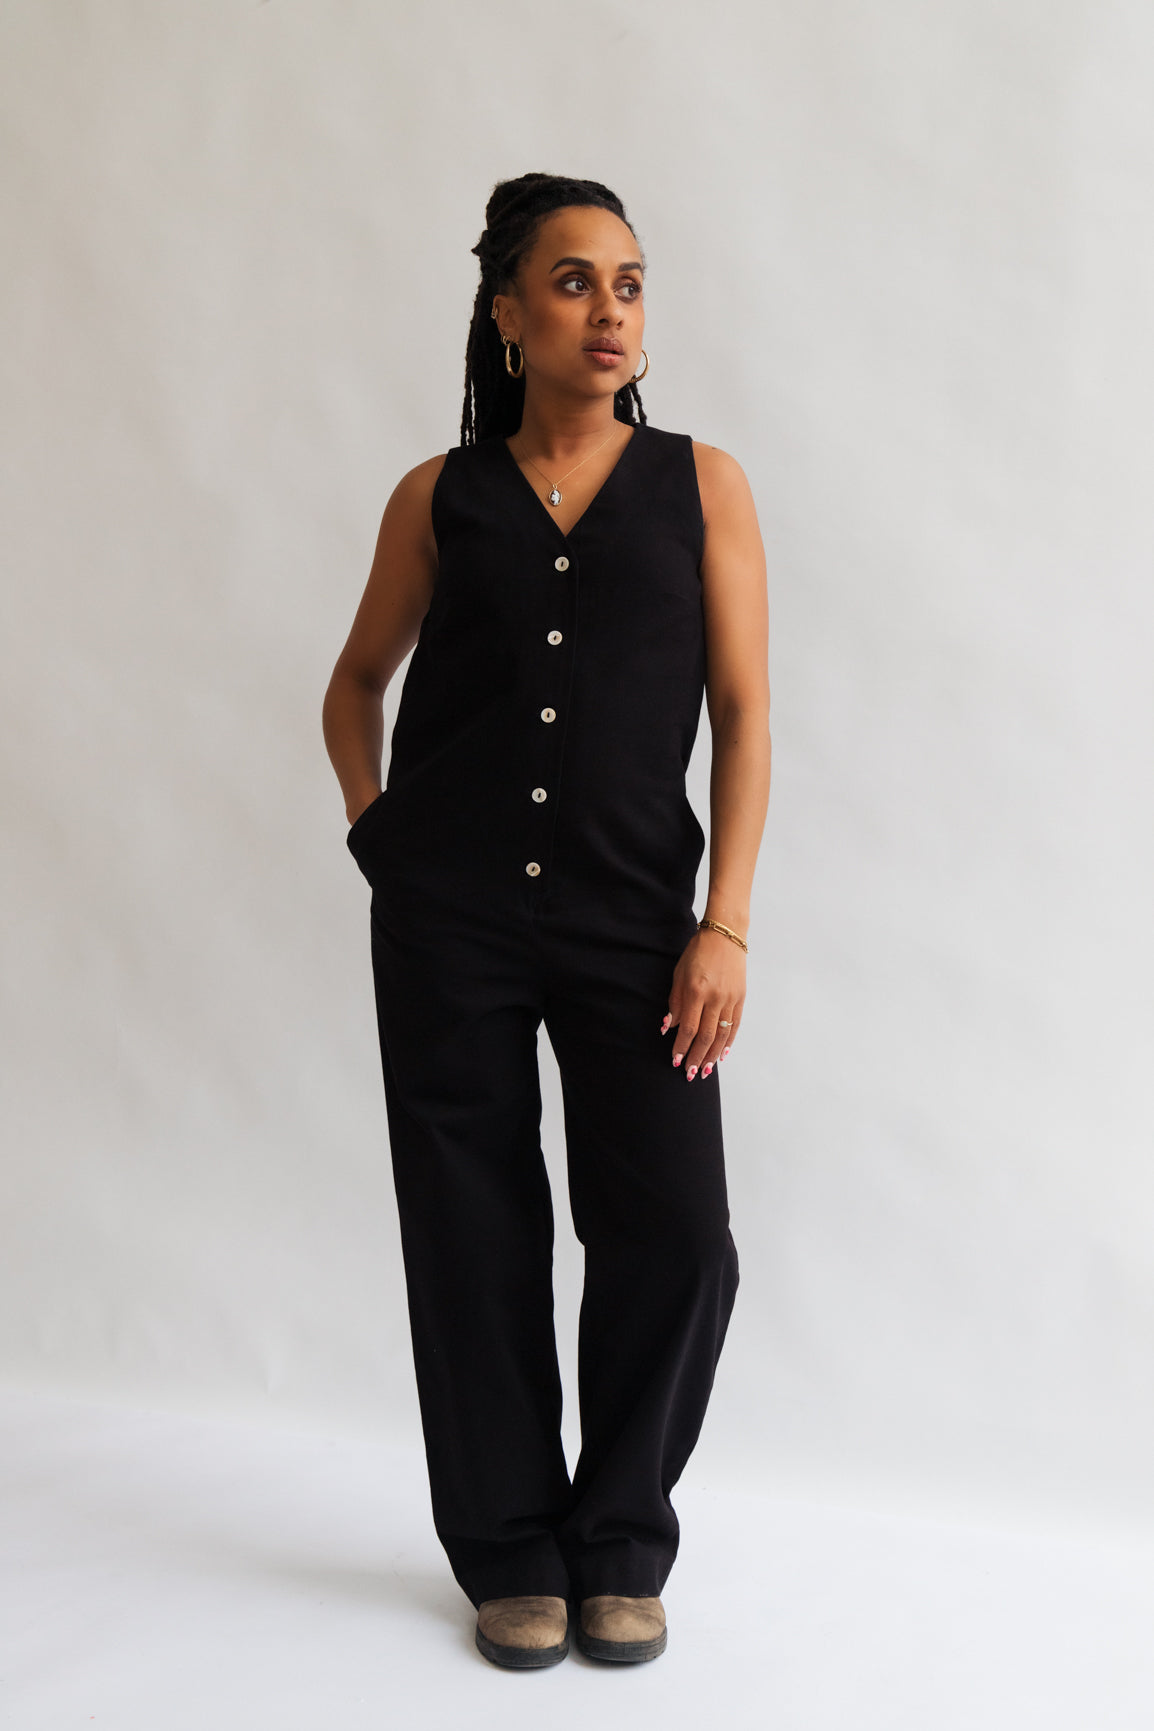 Black color Jumpsuit overall workwear cotton canvas with pockets 5 buttons v-neck tall girls short girls oeko-tex sustainable clothes handmade